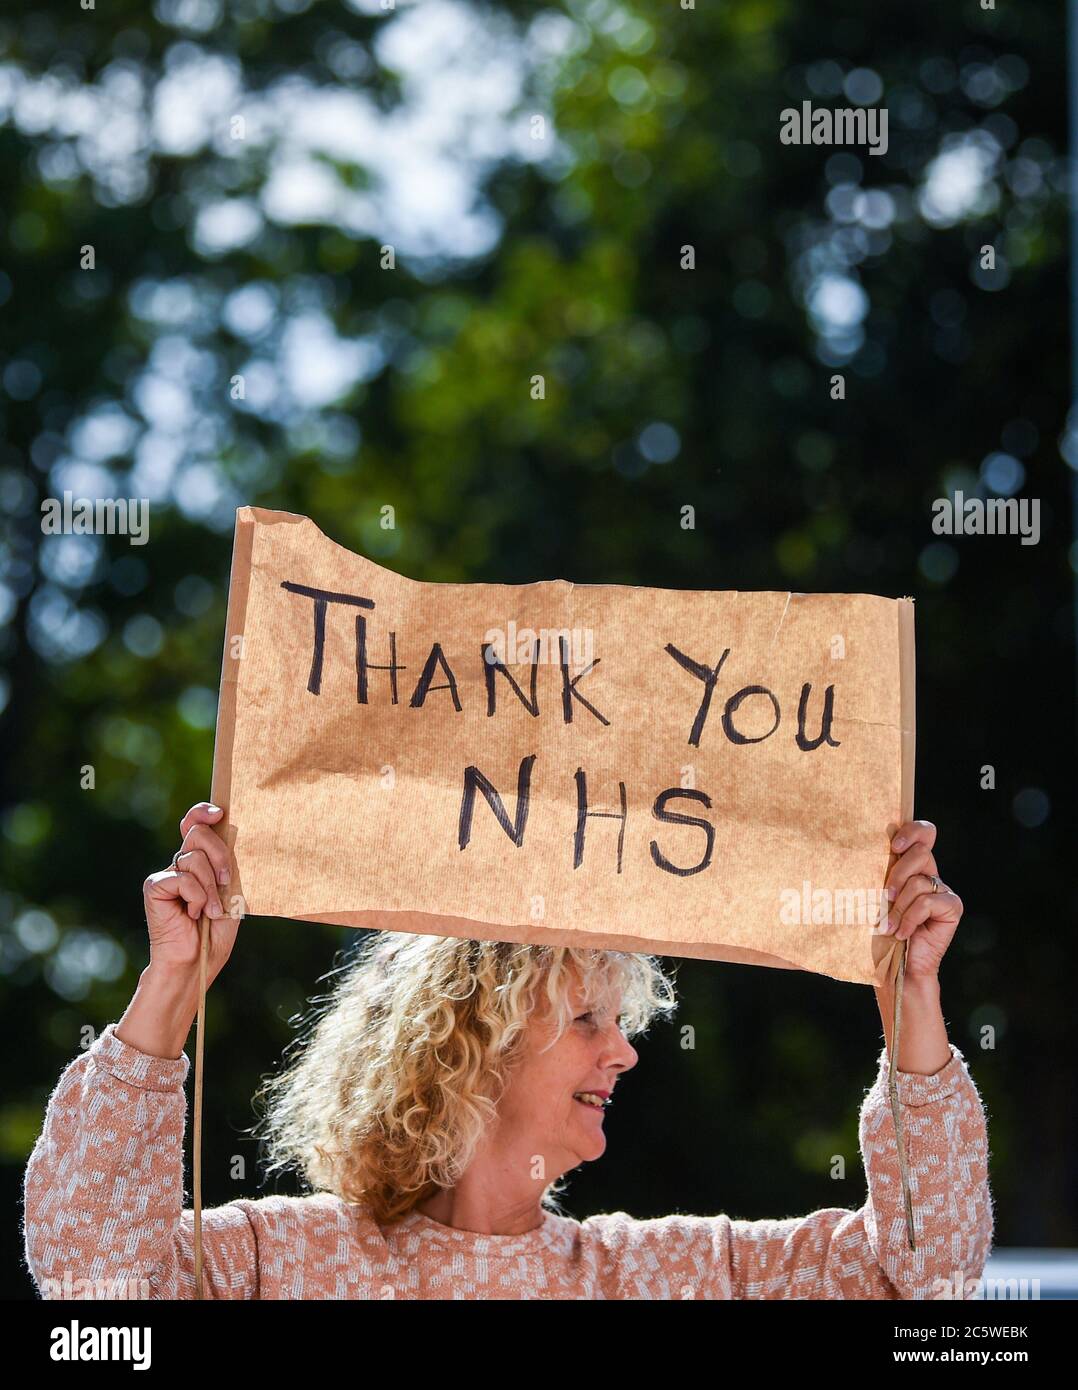 Brighton UK 5th July 2020 - Residents in the Queens Park area of Brighton join in the Clap For Carers at 5pm today to mark the 72nd anniversary of the NHS which was founded in 1948 : Credit Simon Dack / Alamy Live News Stock Photo